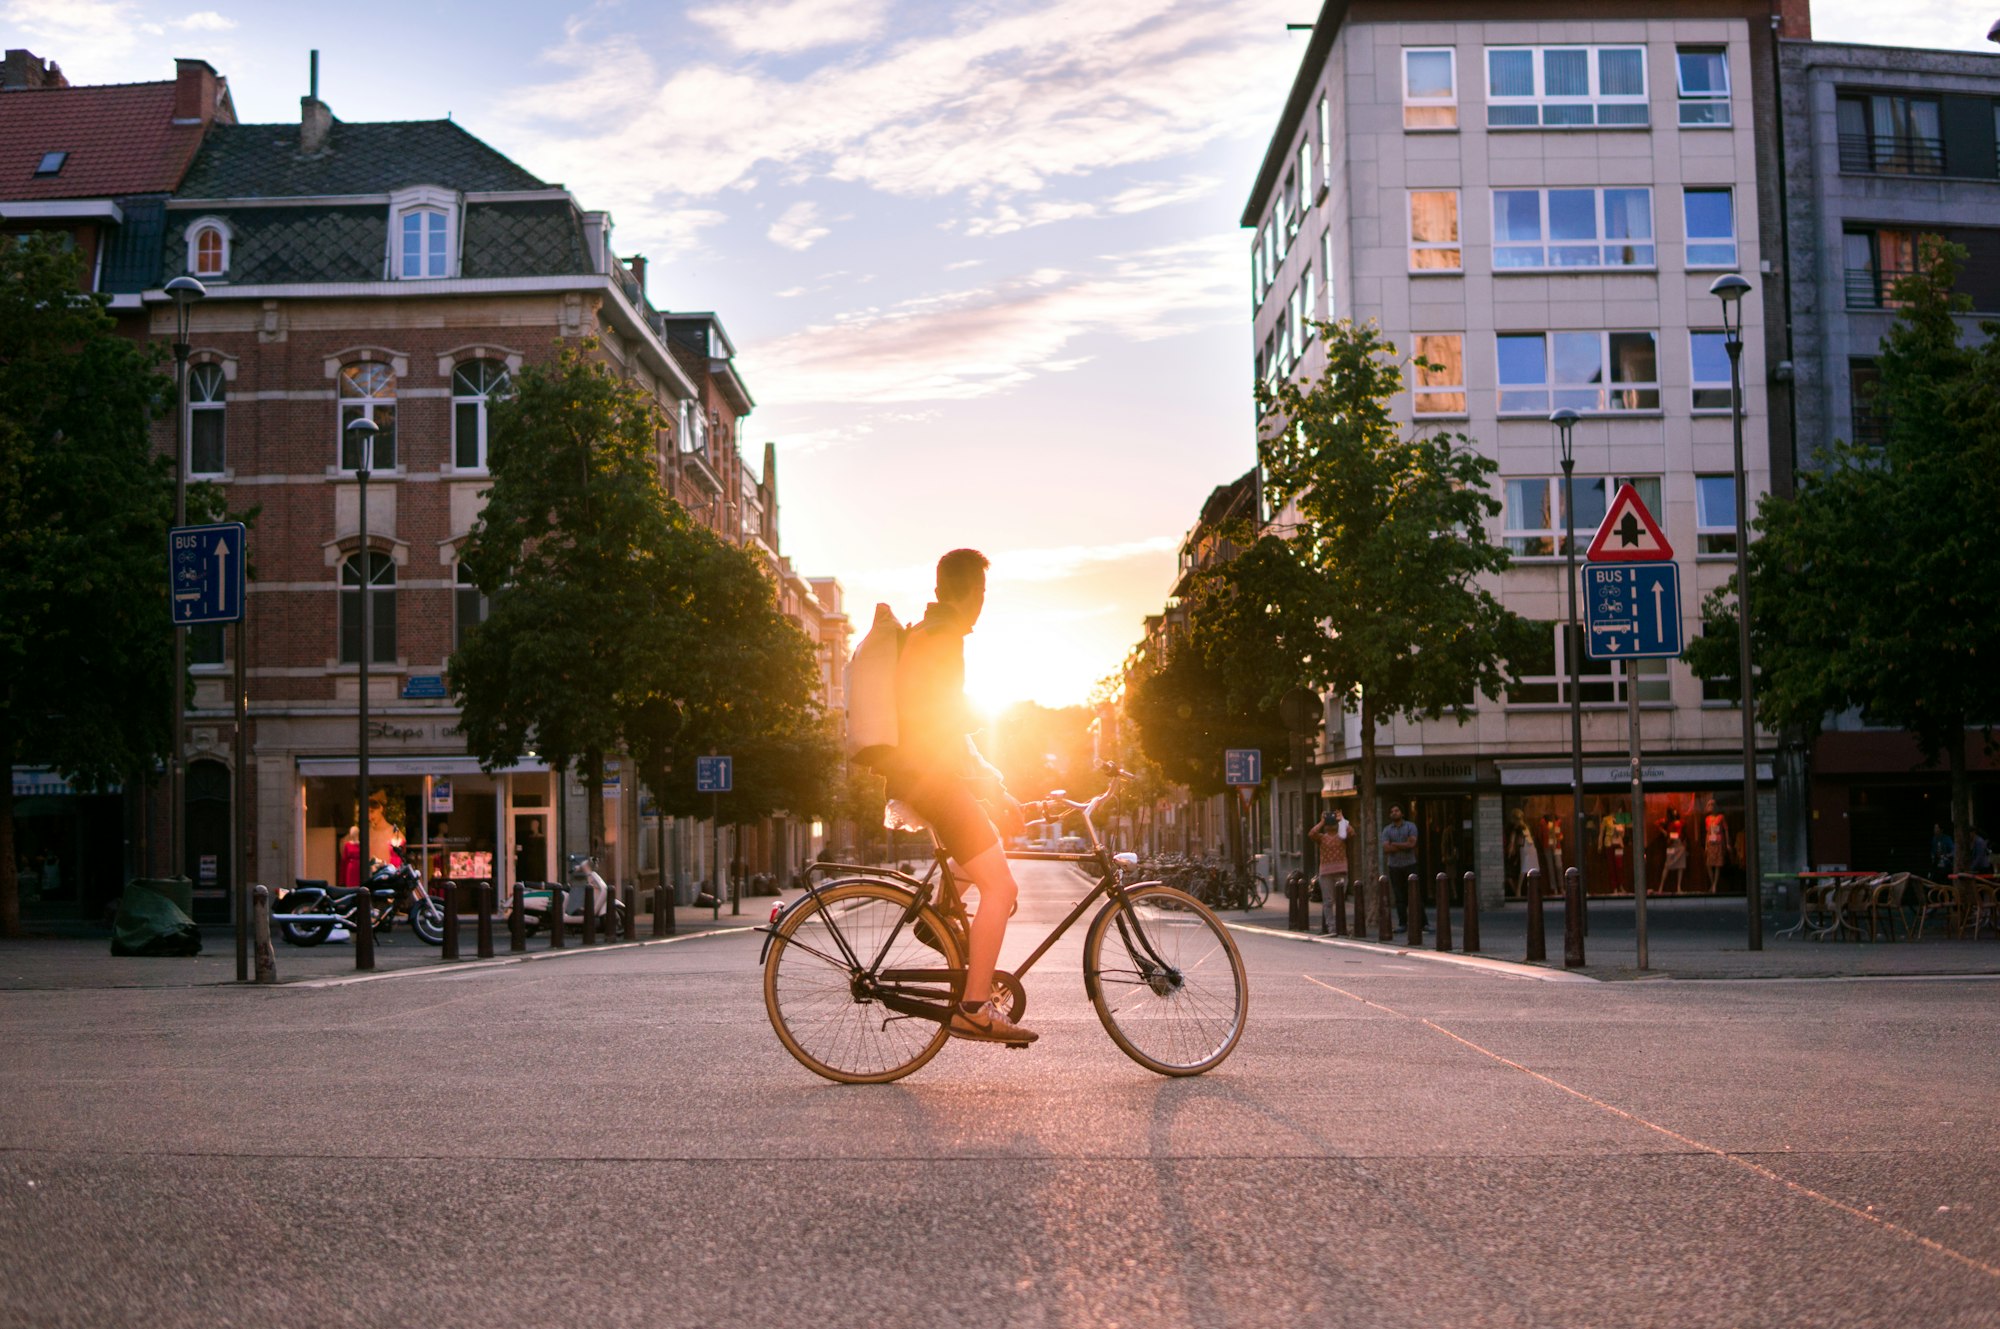 This picture was taken on my last night in Leuven before I went home for the summer. I was enjoying the sunset in the city centre when someone on a bike passed me and caught a glimpse of the sunset too. He also stopped to take a picture, but I think mine came out great with him as the subject. Thank you, random biker!